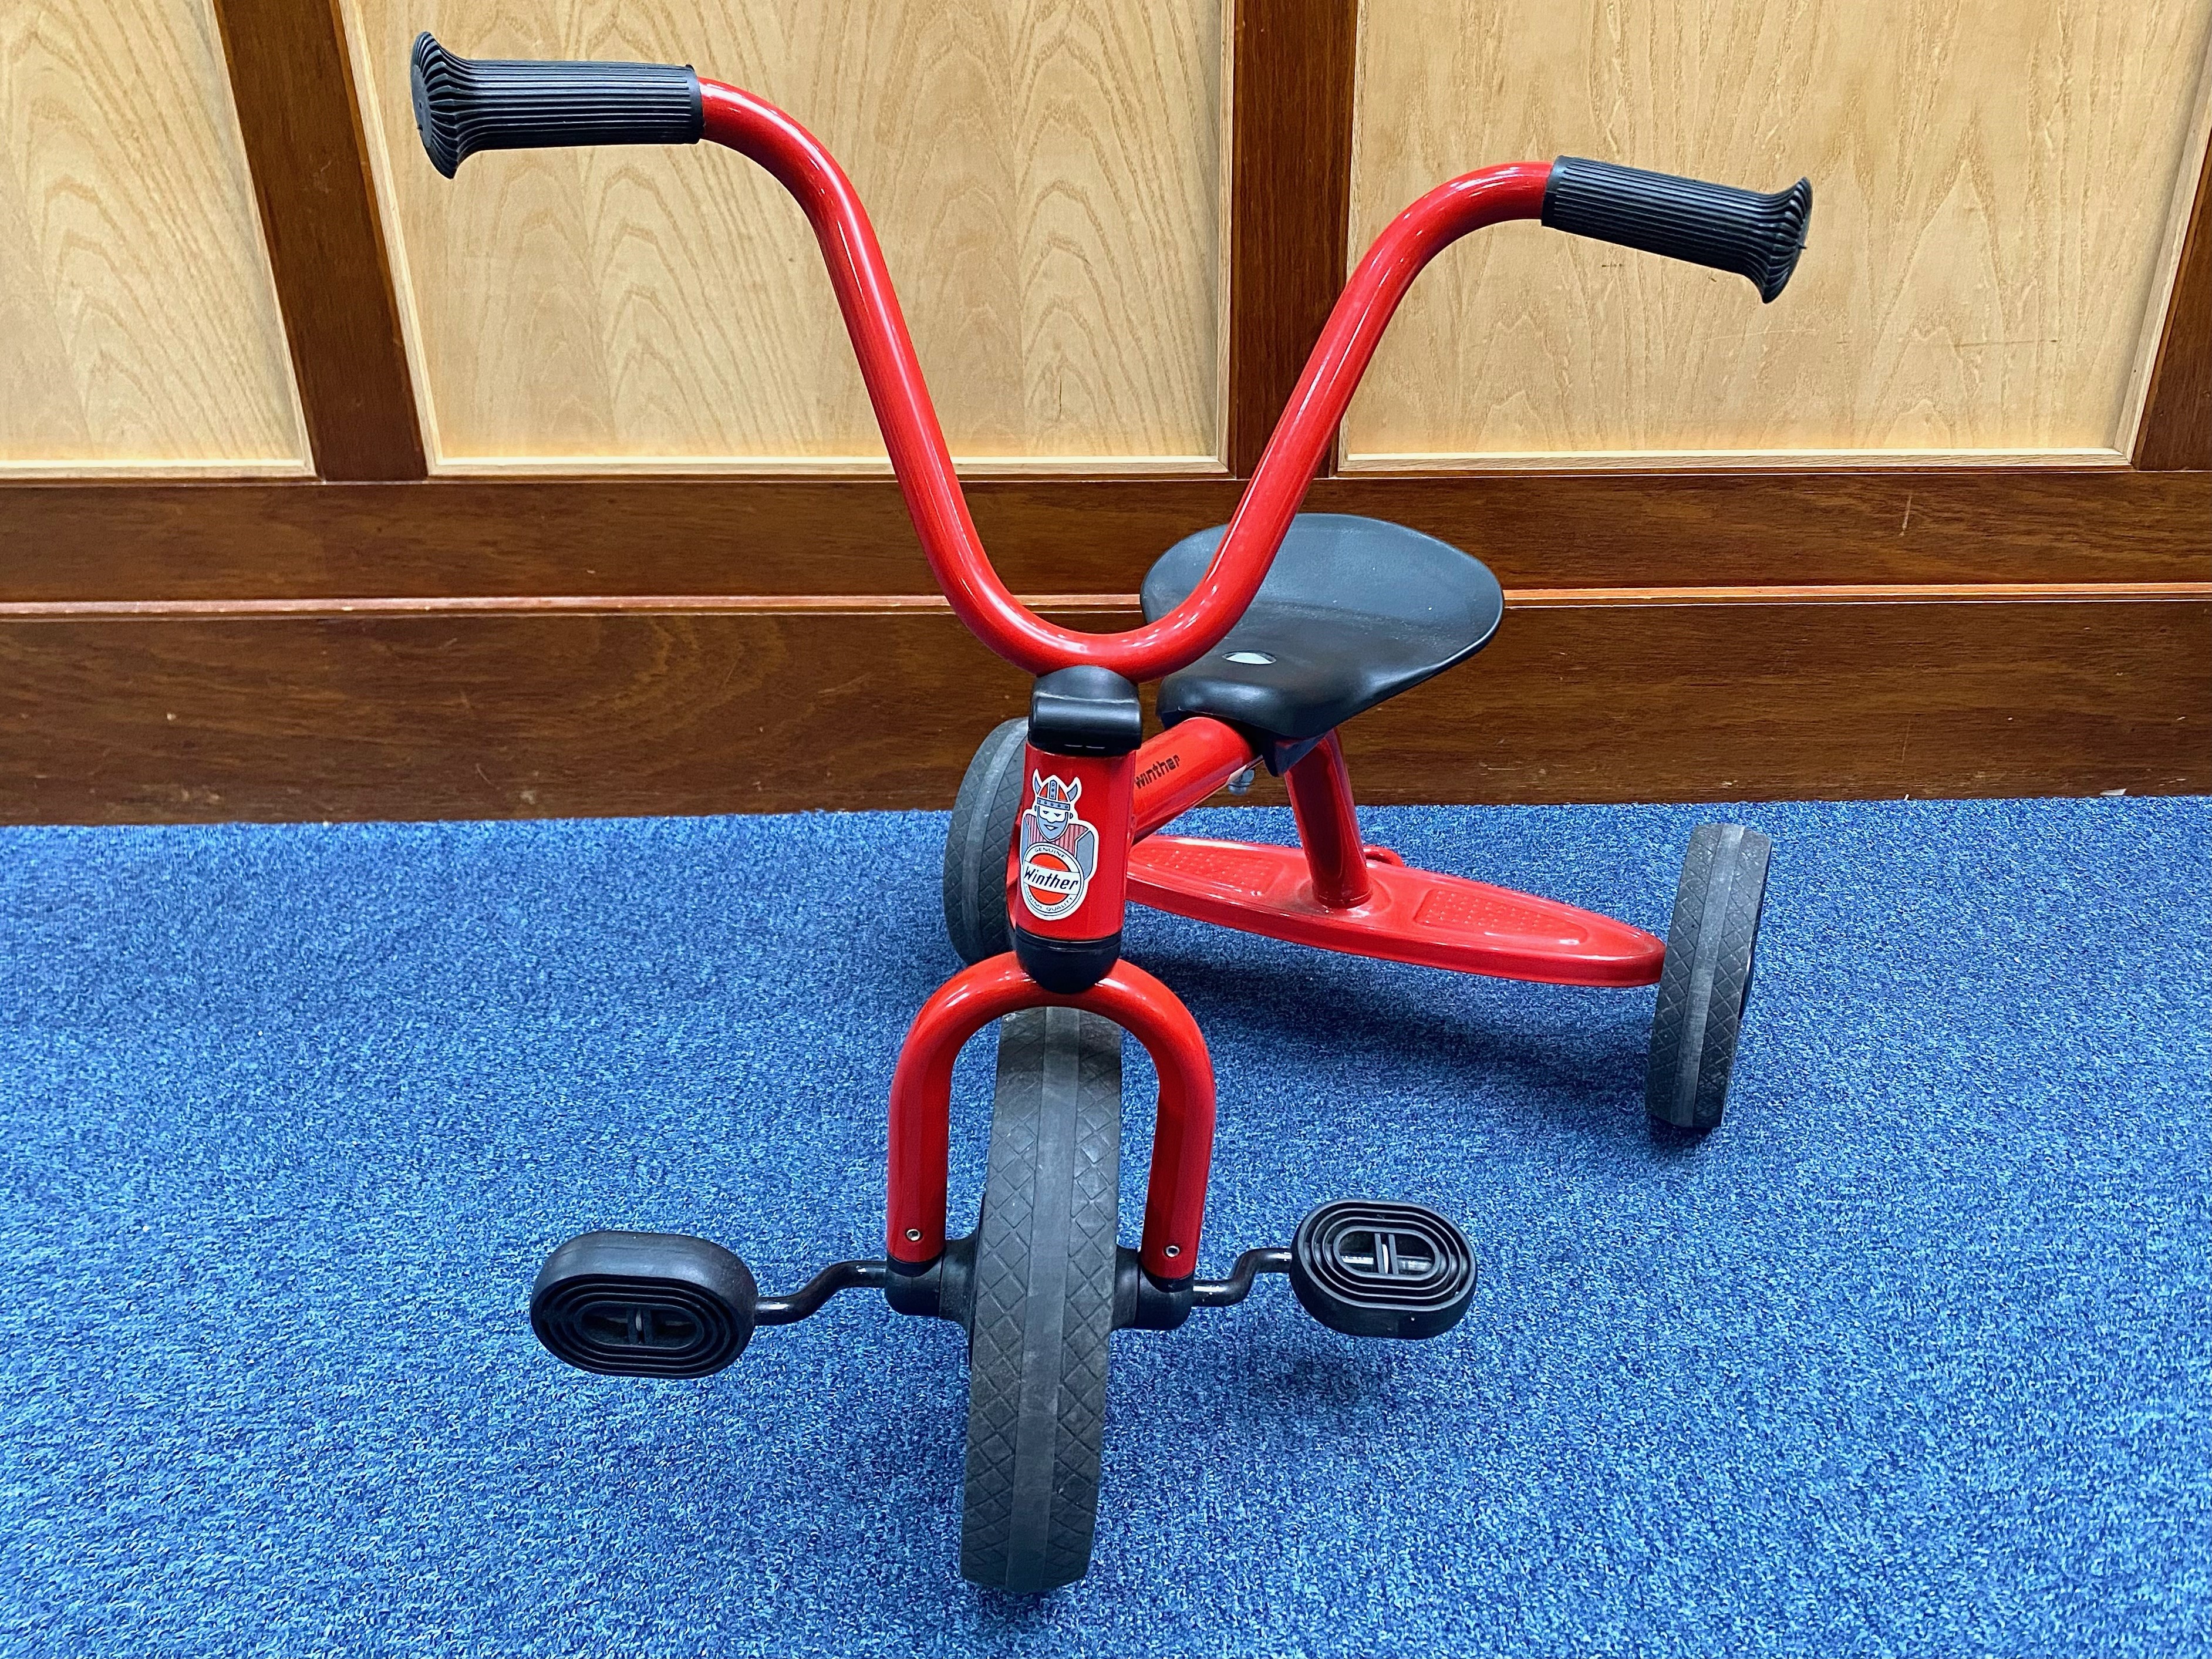 Child's Winther Tricycle, made in Denmark, red rust-proof finish with black saddle and three wheels.